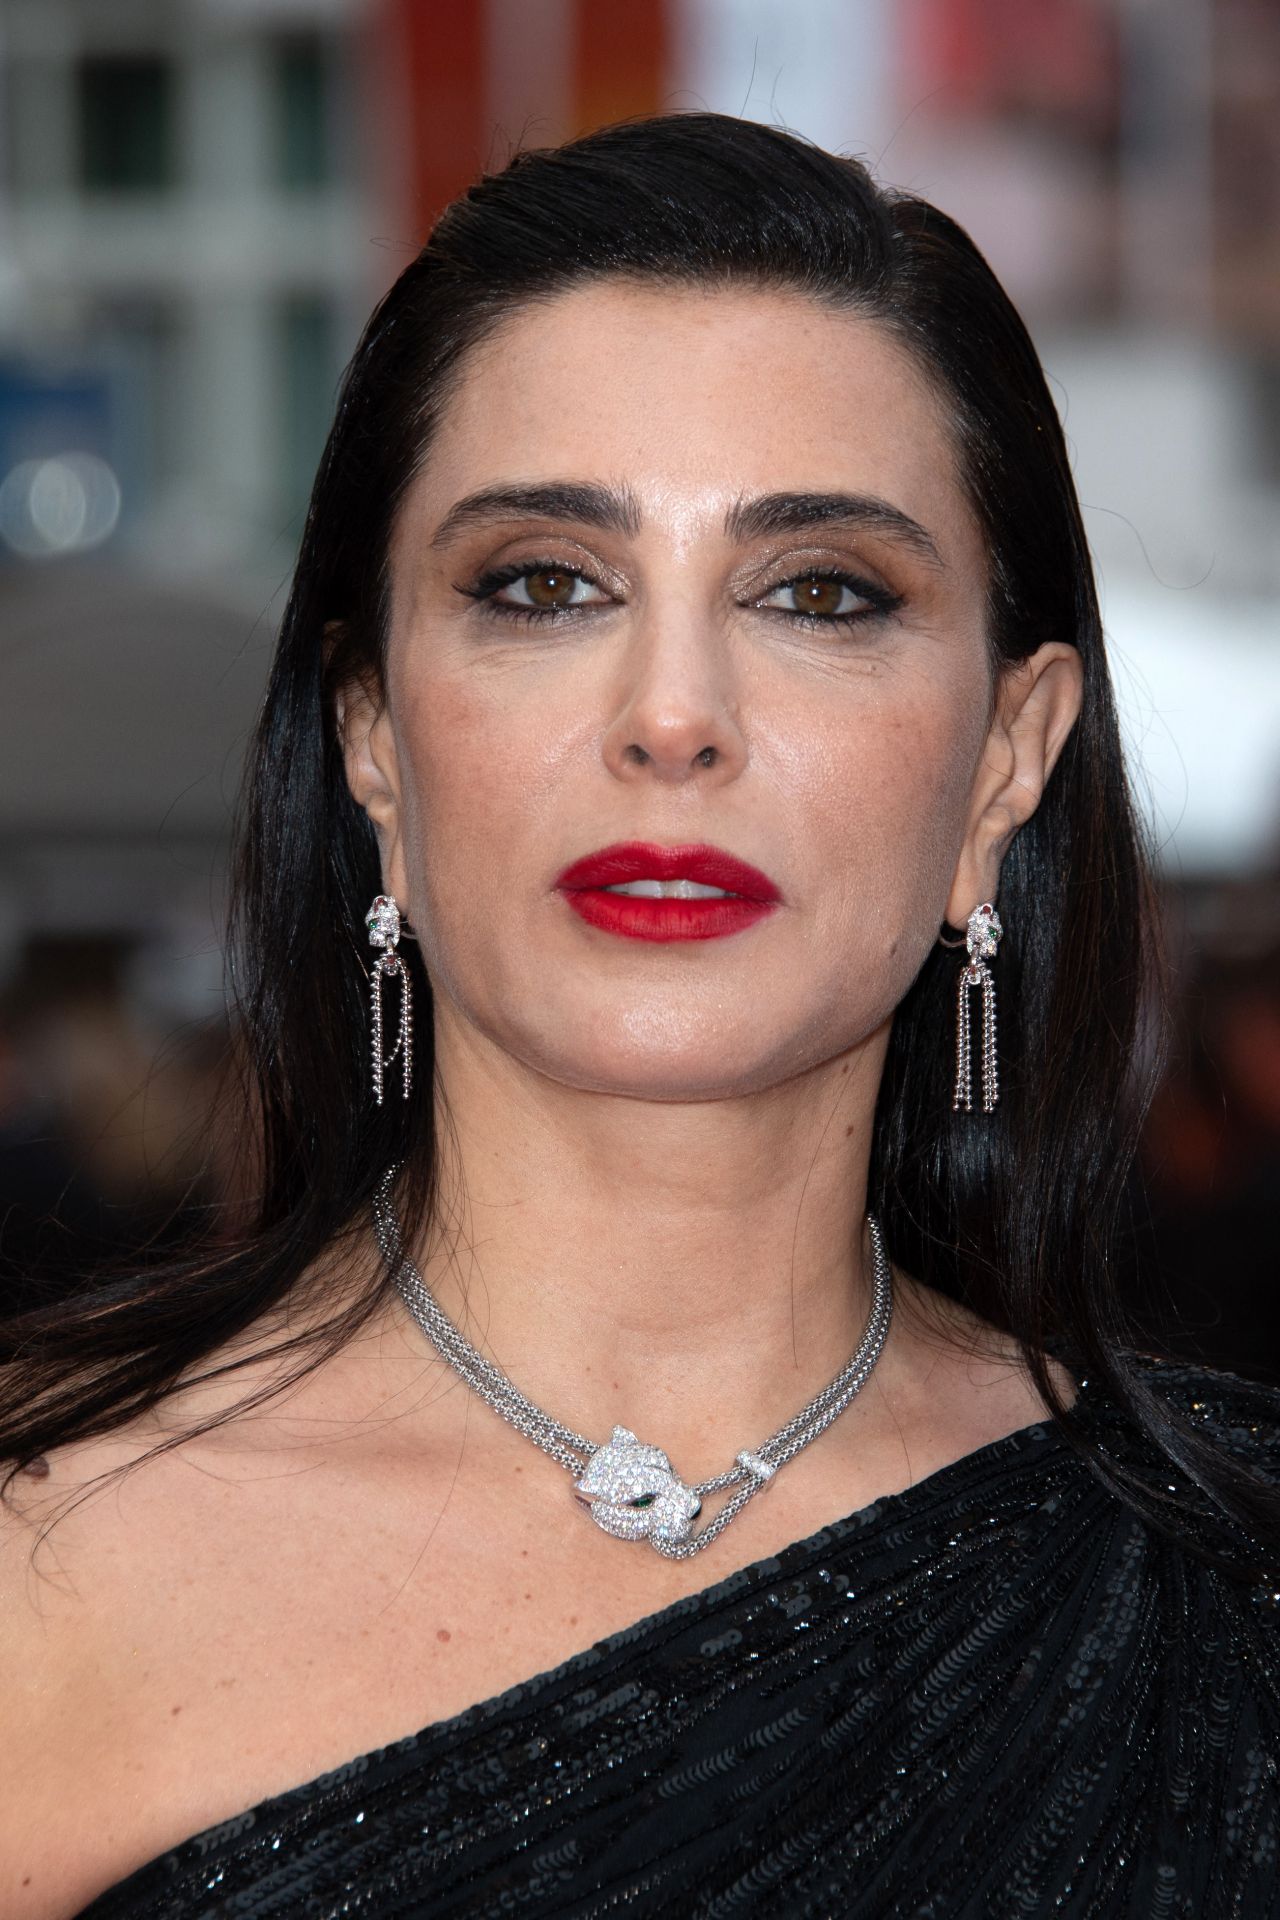 NADINE LABAKI AT RED CARPET THE 72ND CANNES FILM FESTIVAL